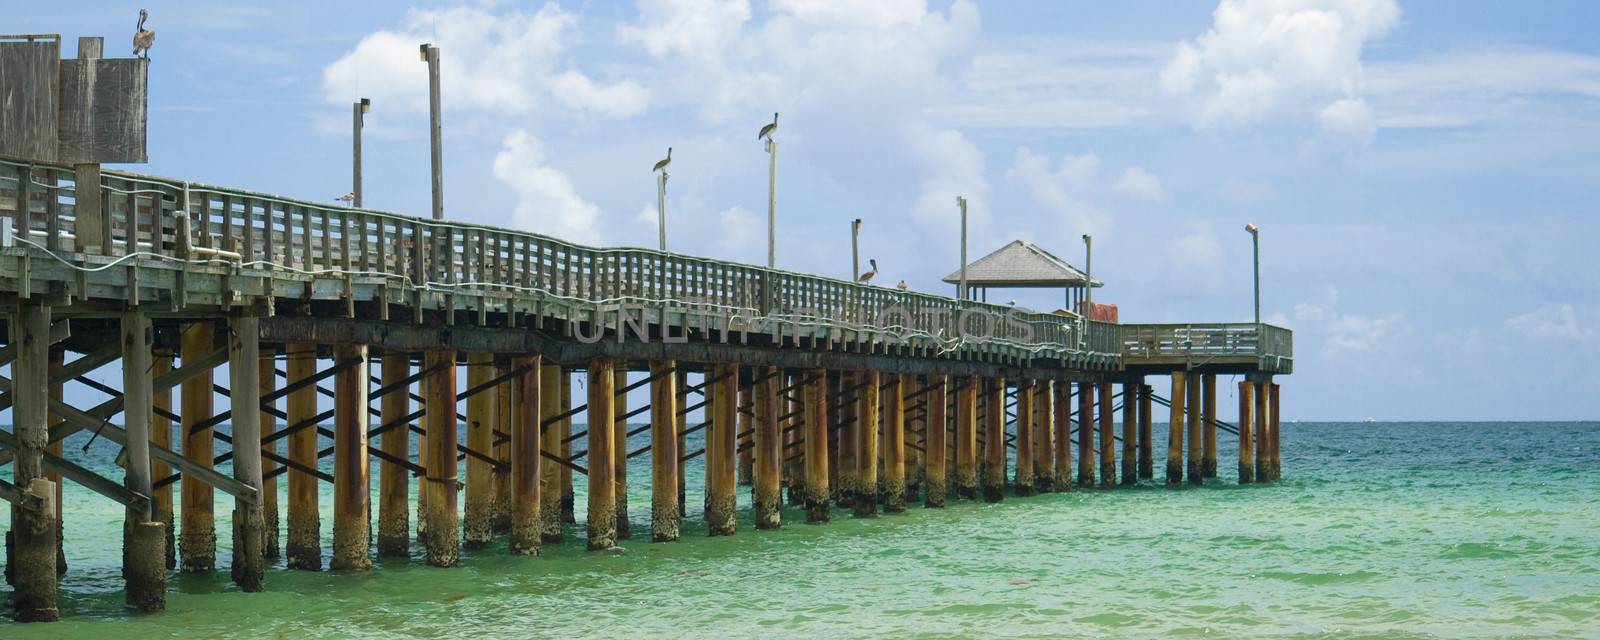 A beautiful wooden pier on a beach in Miami.